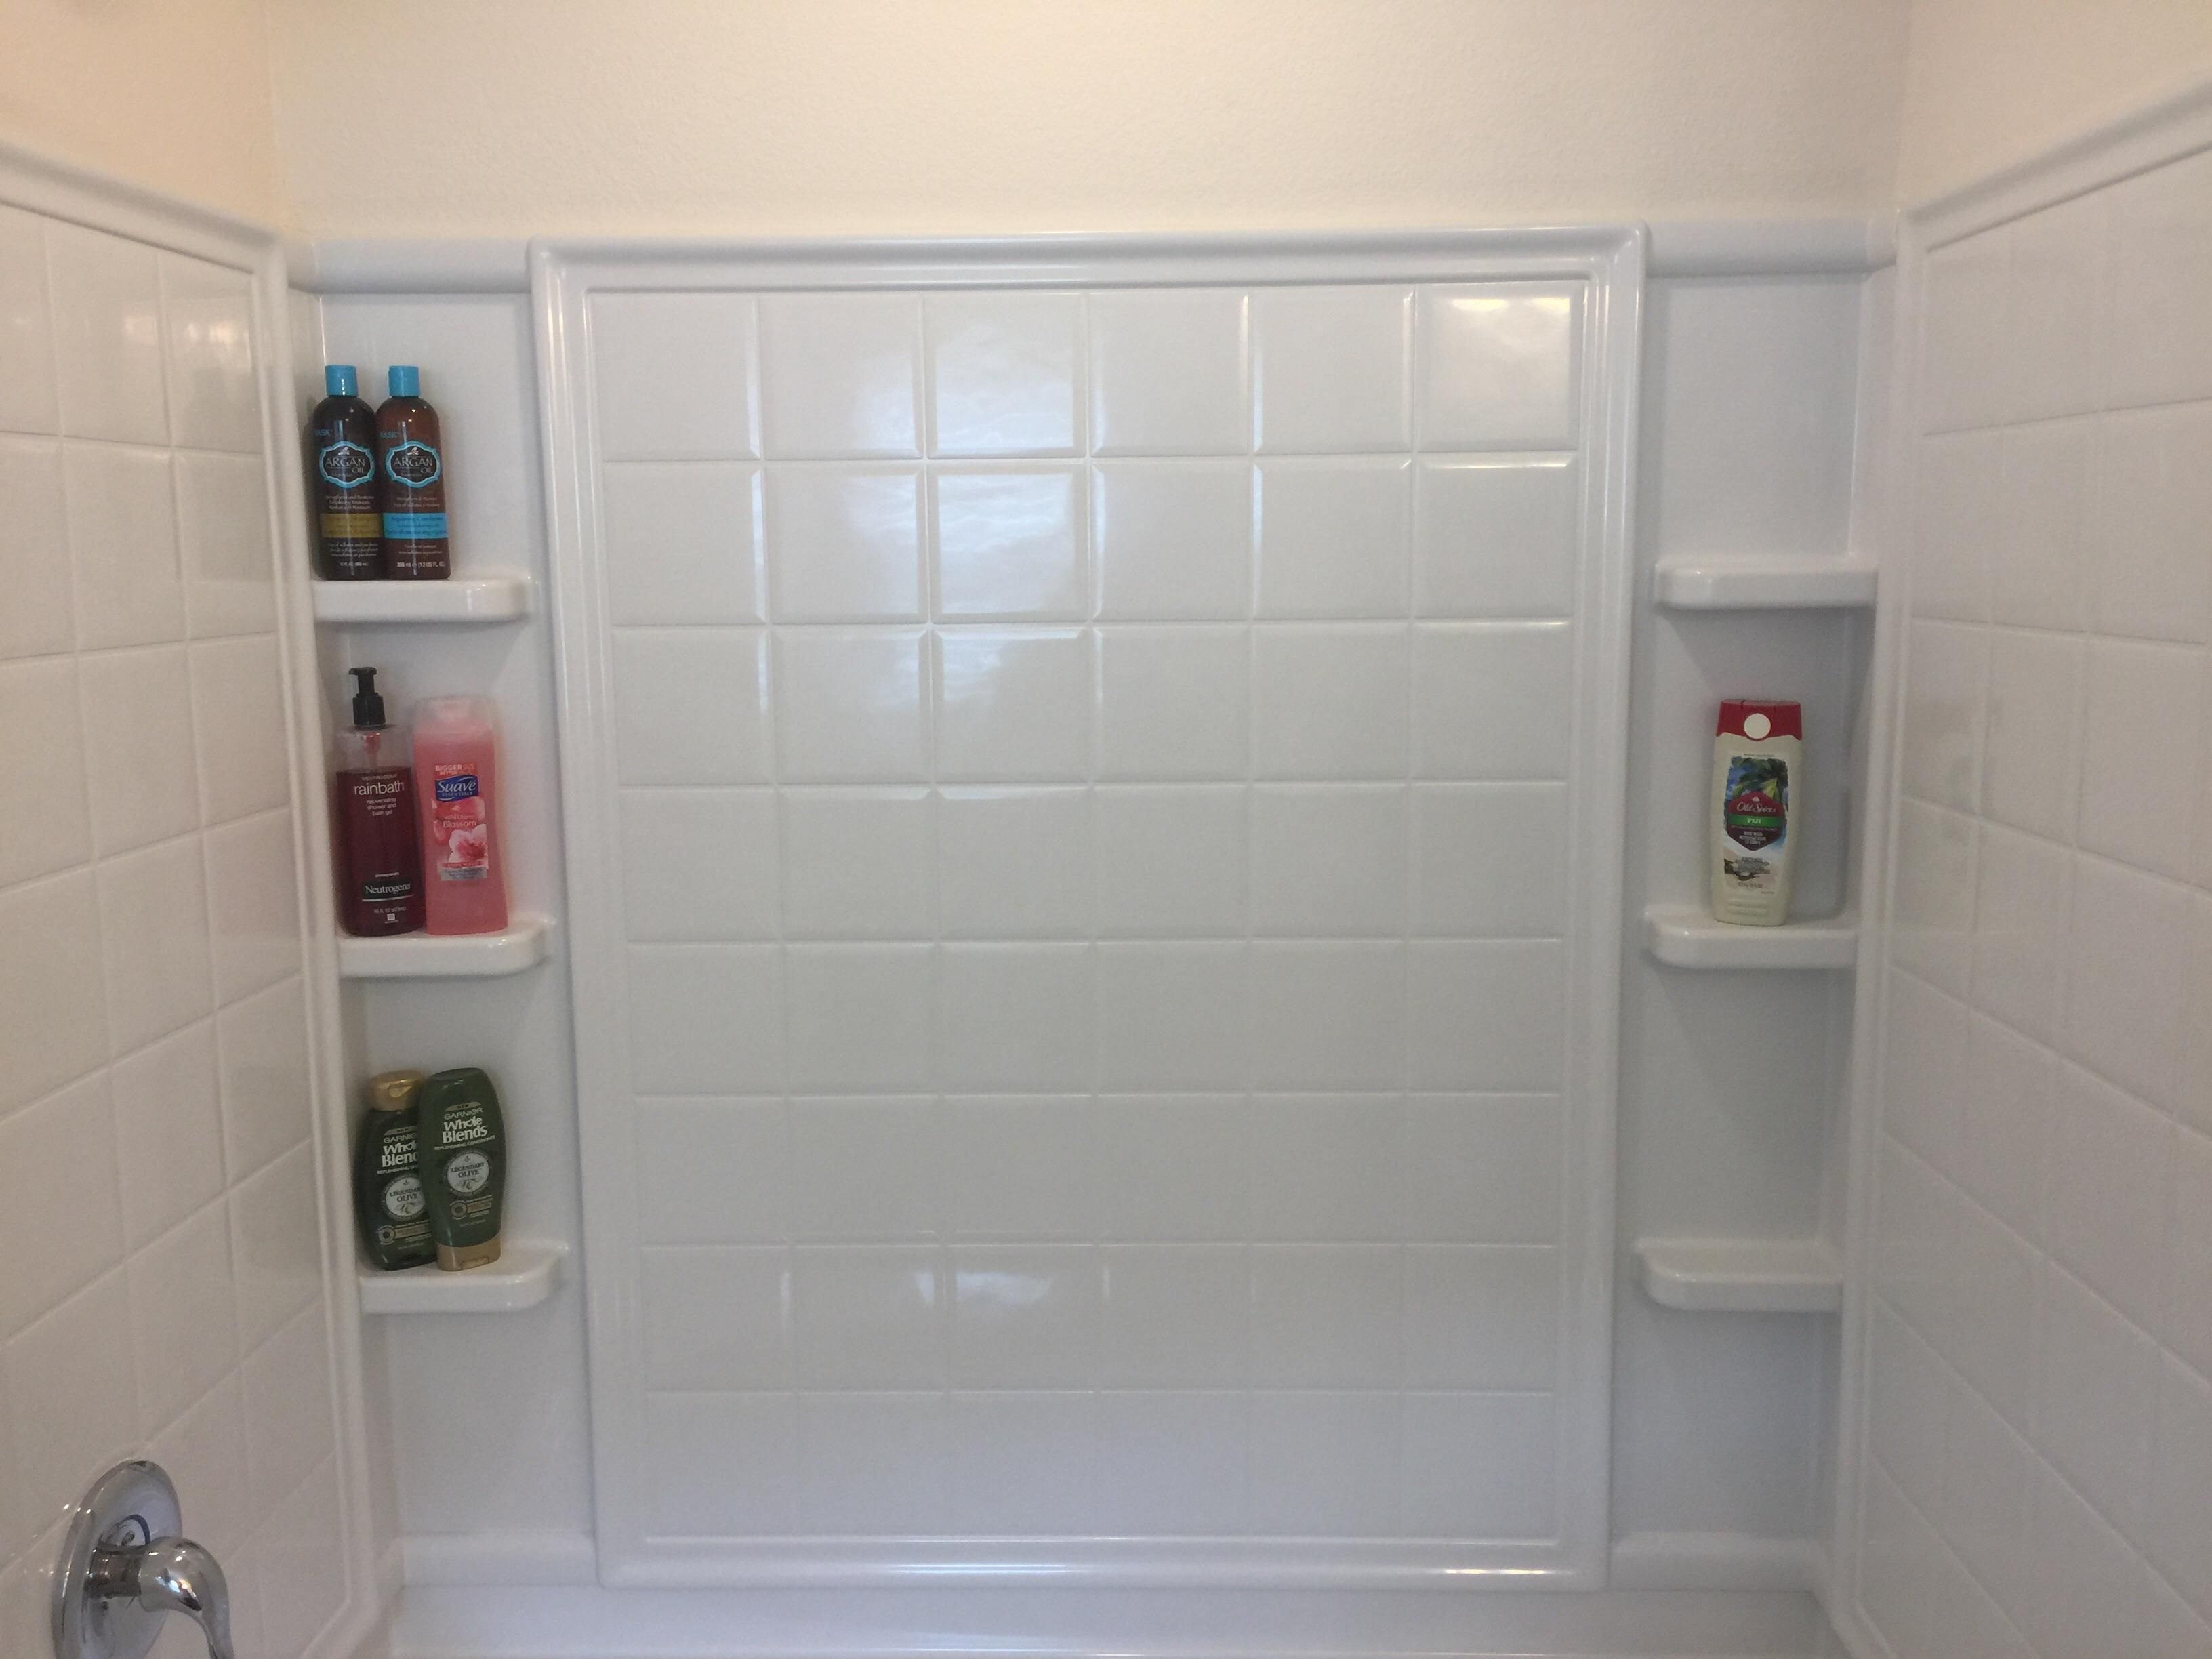 My girlfriend and I just bought a home. We’re unpacking. Her side of the shower vs. mine.